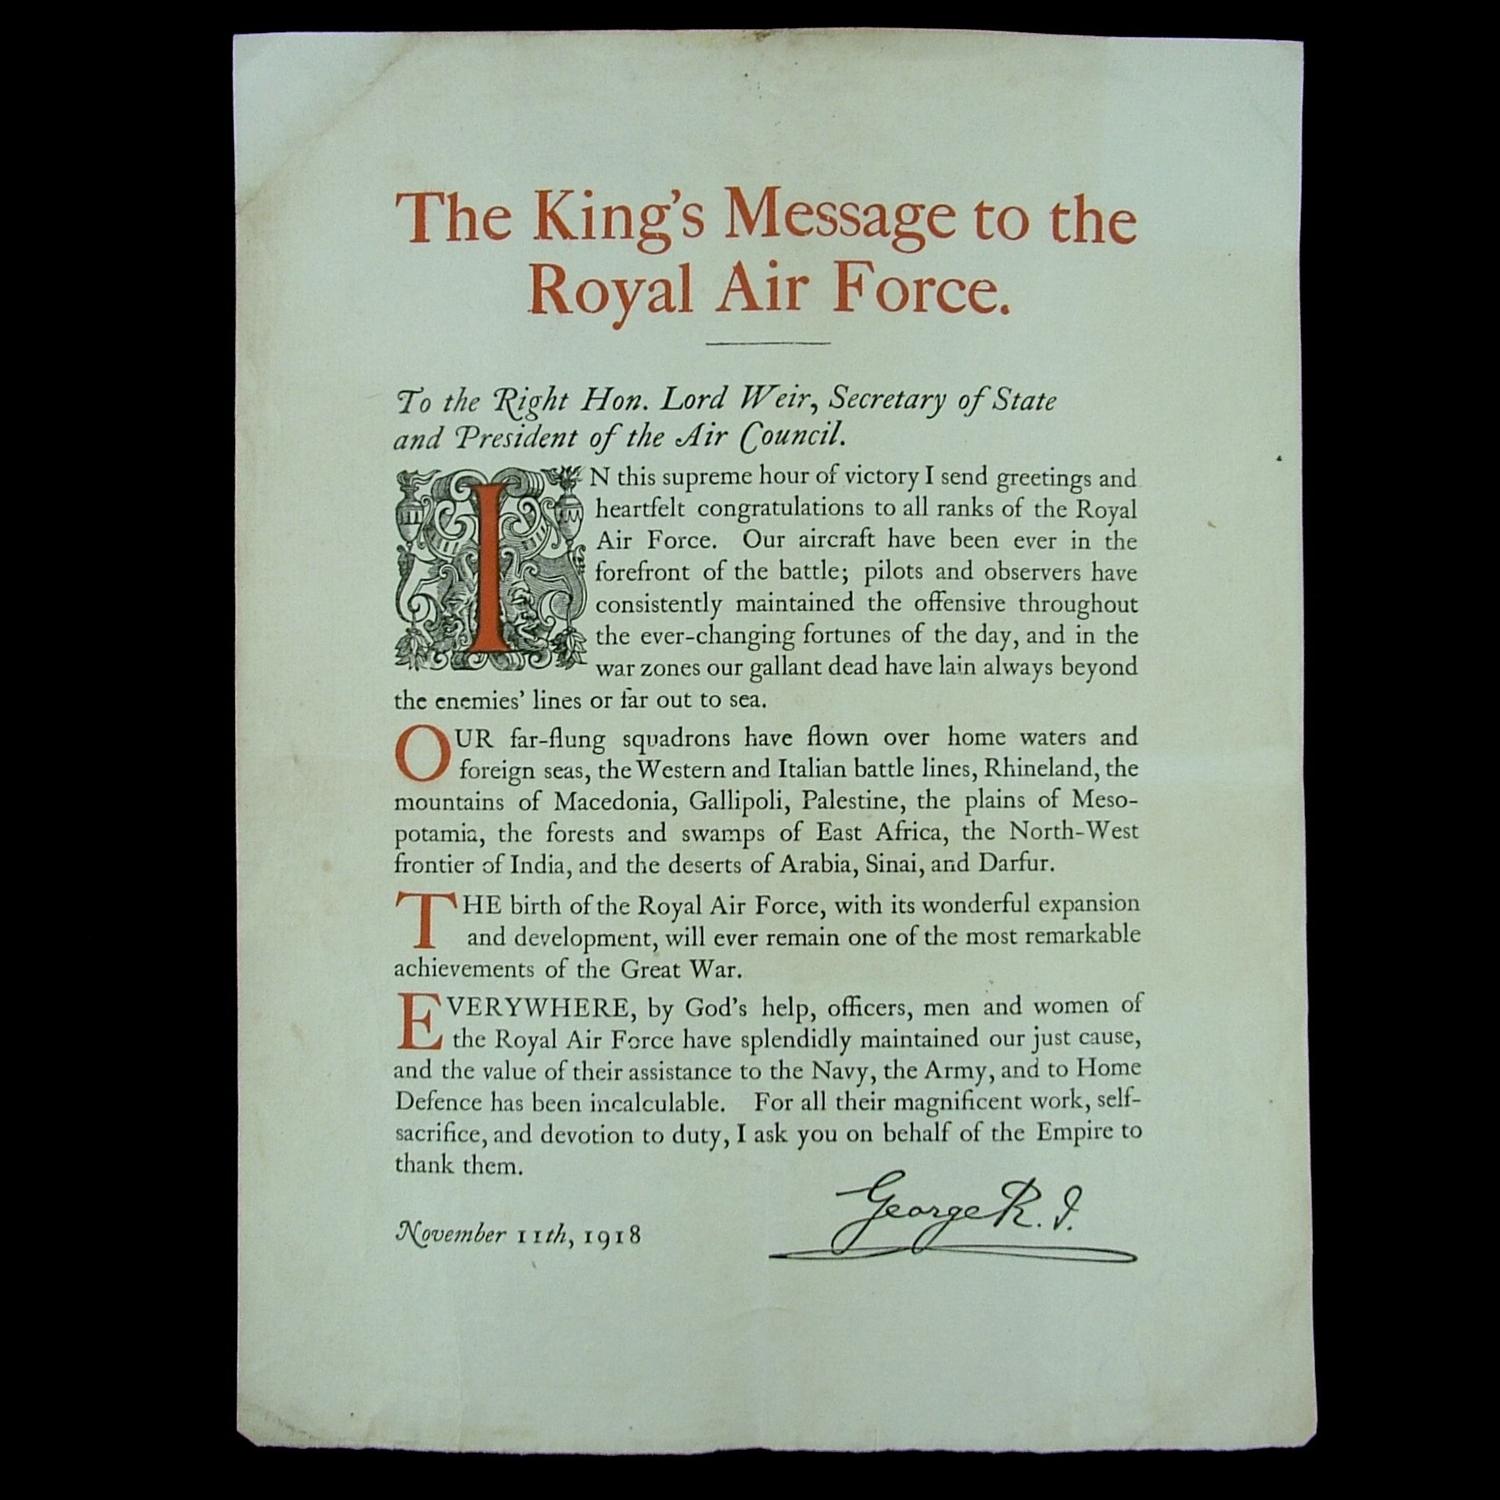 King's Armistice Day message to the RAF, 1918